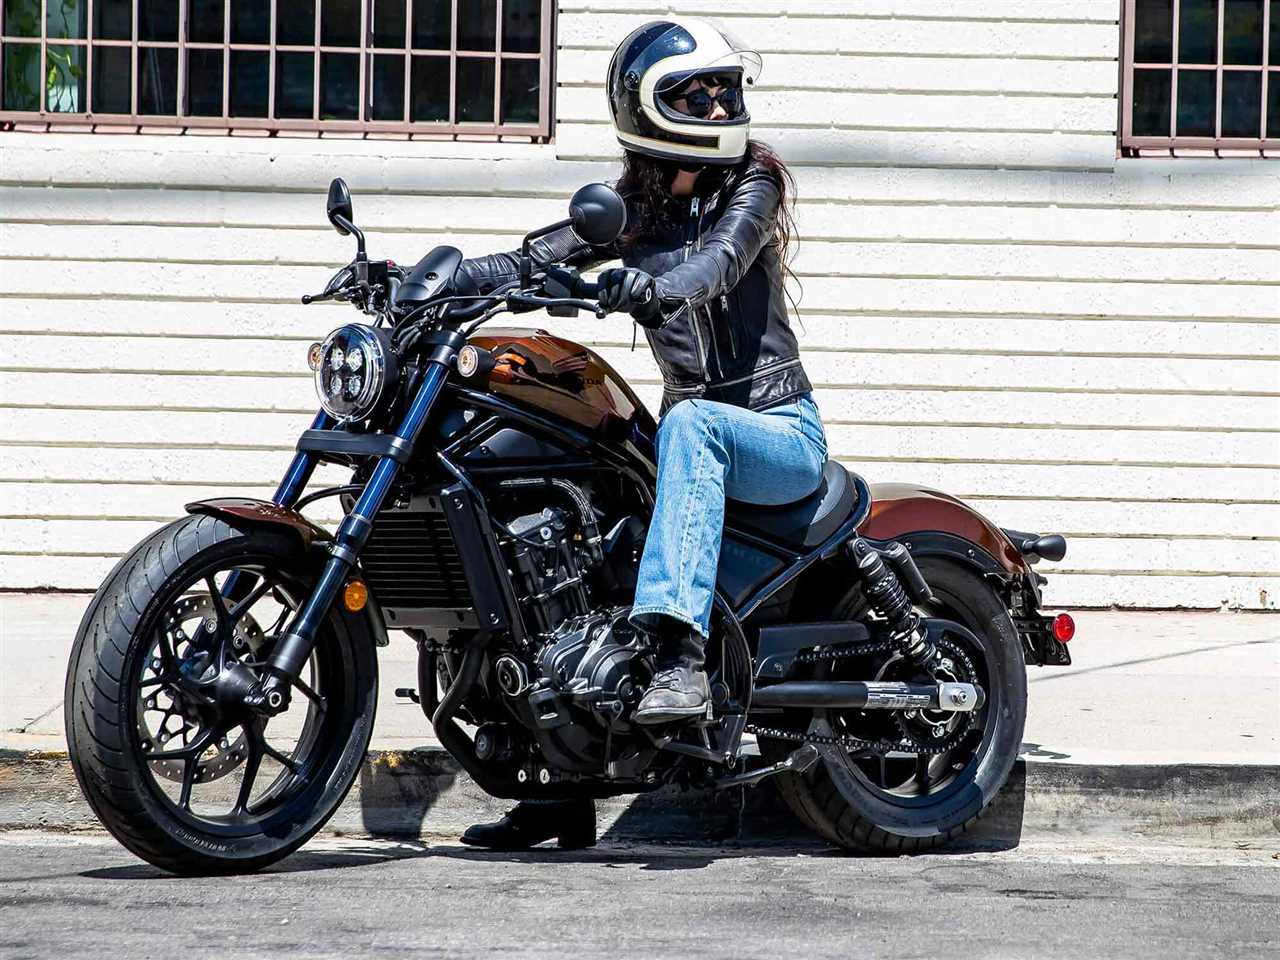 Discover the Latest Motorcycle Designs That Will Take Your Ride to the Next Level!